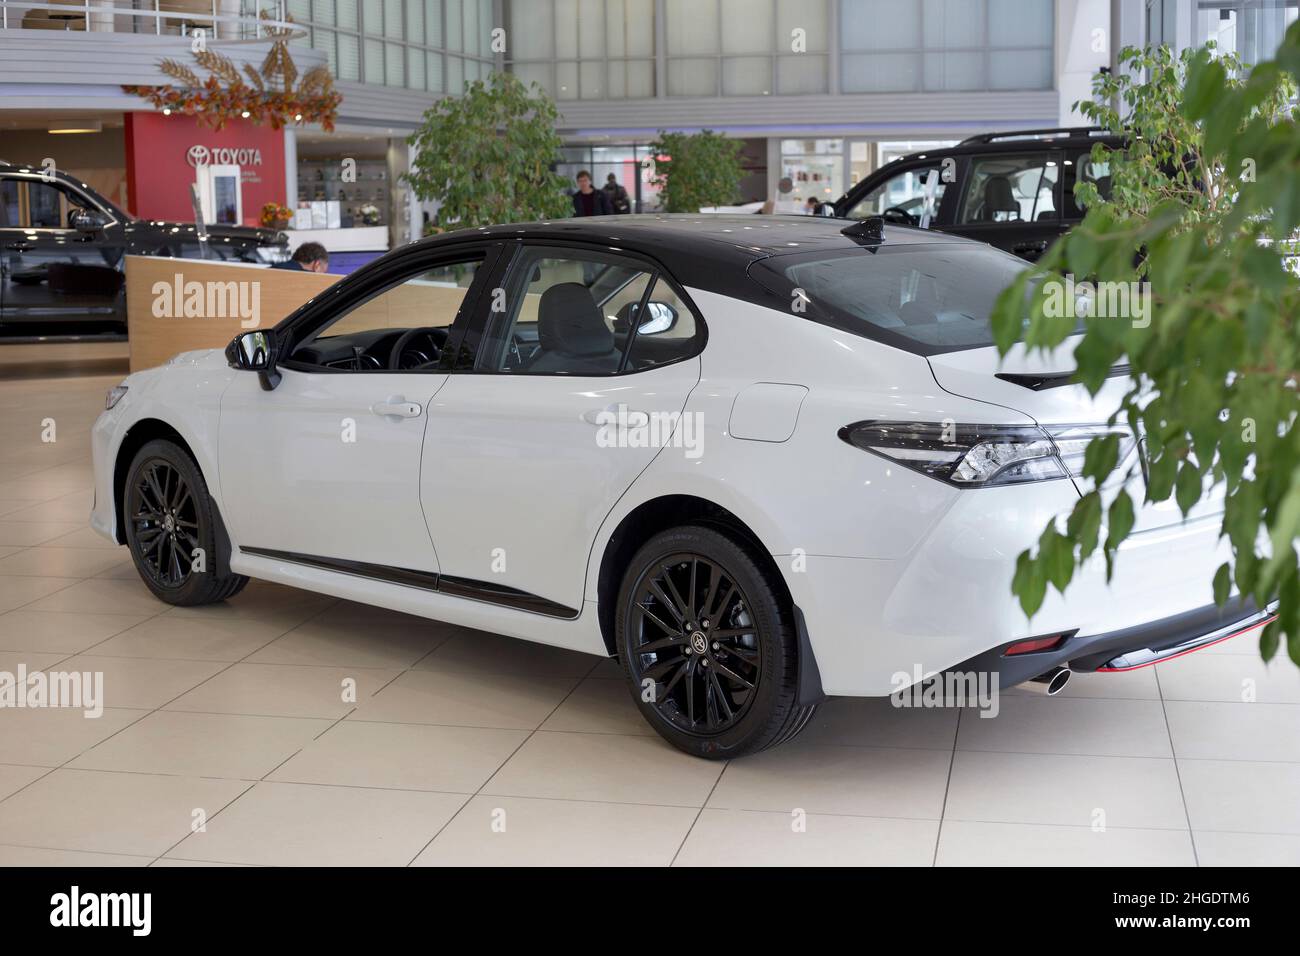 Russia, Izhevsk - September 30, 2021: Toyota showroom. New modern Toyota Camry car in dealer showroom. Side and back view. Famous world brand. Stock Photo